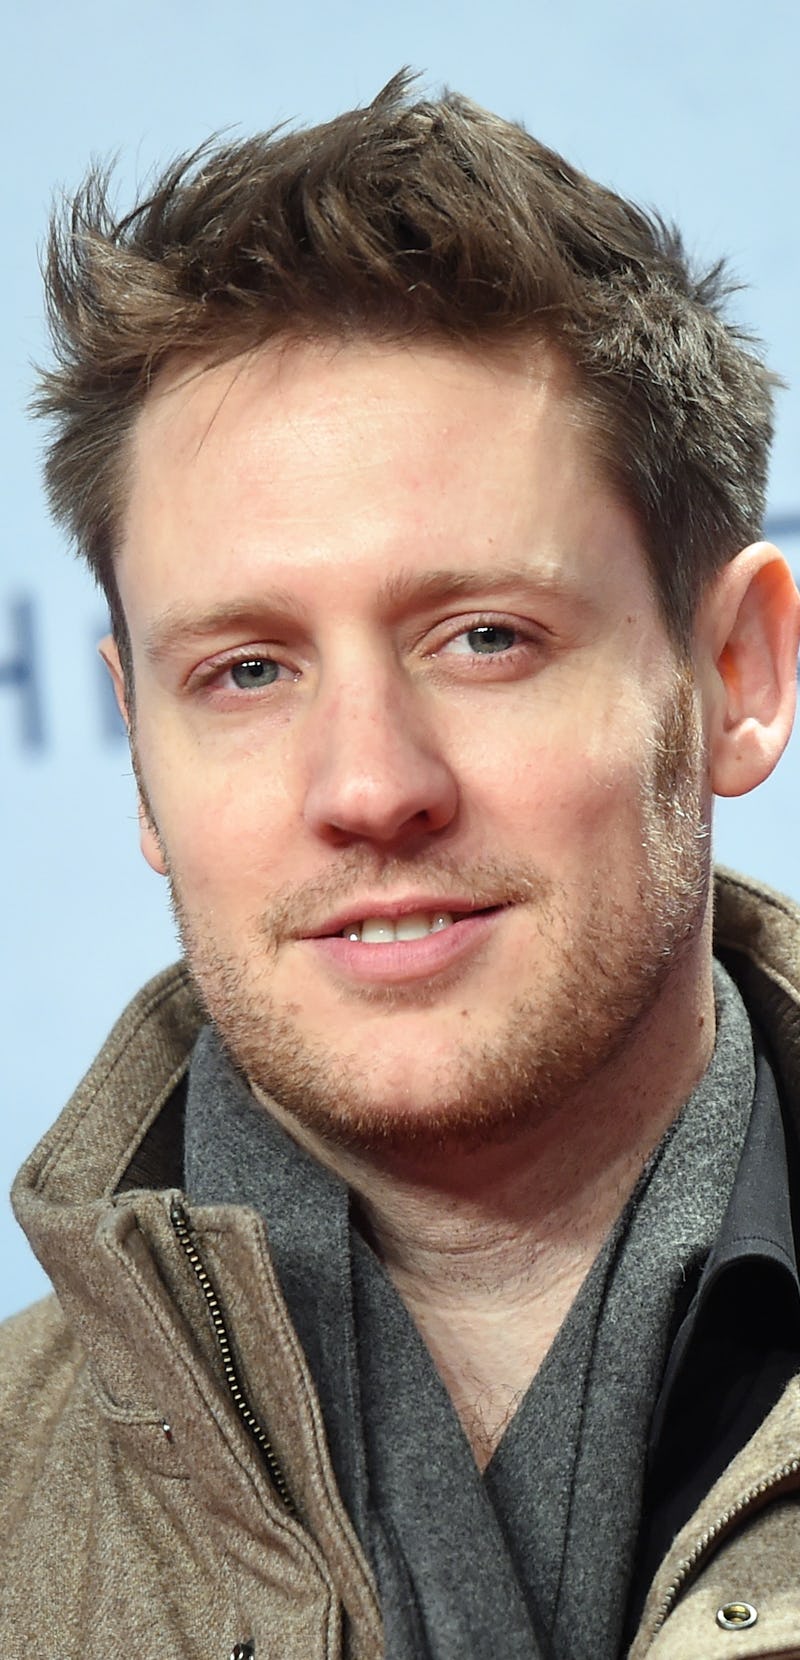 South African director Neill Blomkamp attends the fan event for his new film 'Chappie' in Berlin, Ge...